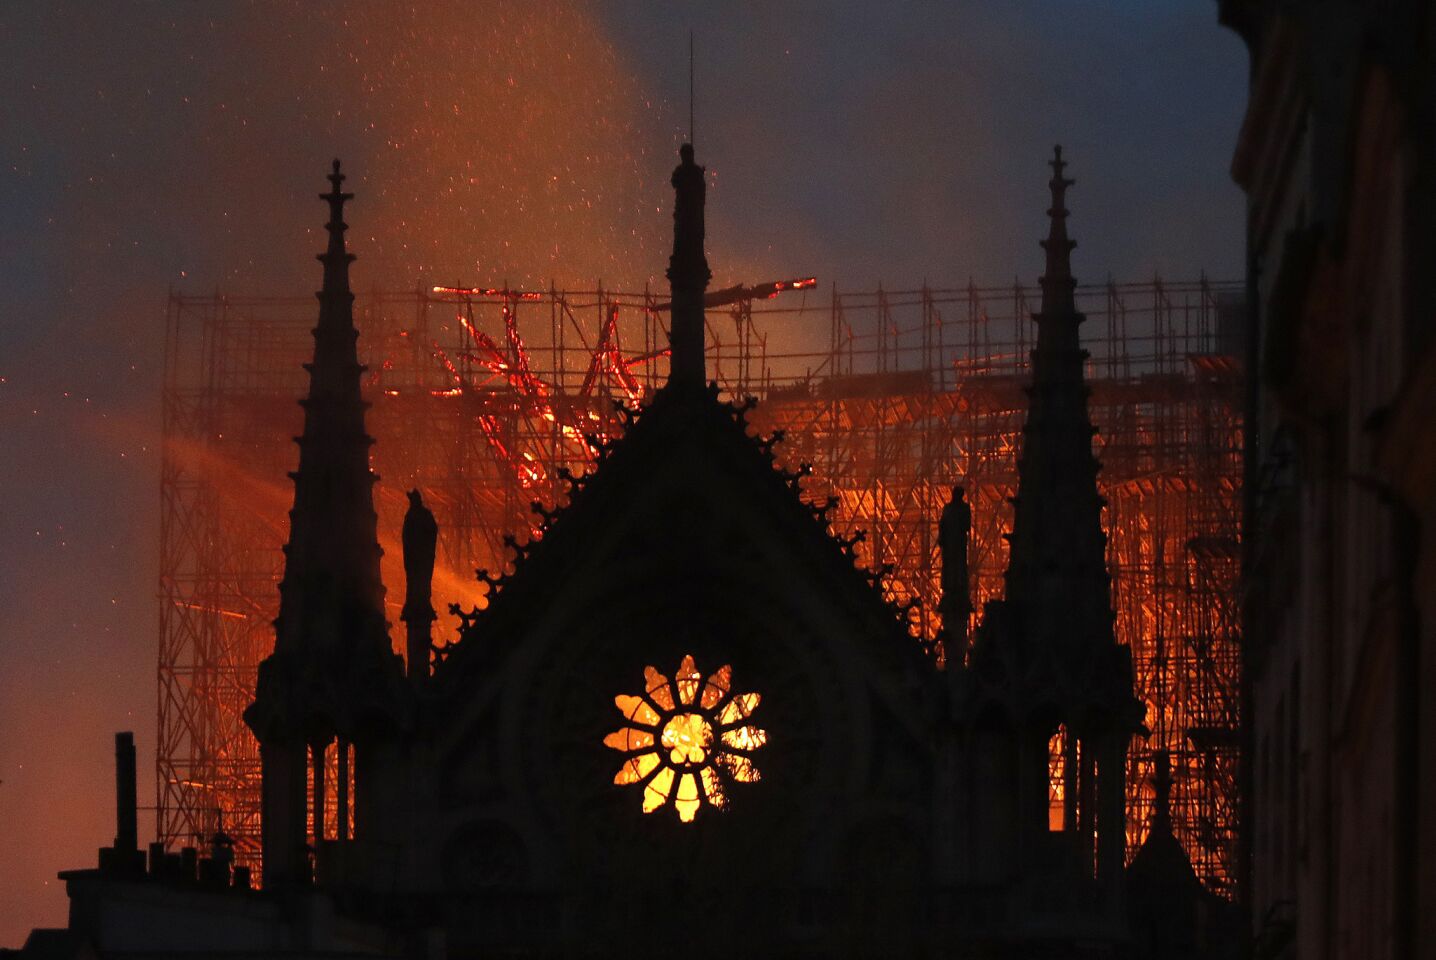 Flames and smoke rise from Notre Dame Cathedral in Paris on Monday, April 15, 2019. A ferocious and fast-moving blaze, which broke out about 6:45 p.m., destroyed large parts of the 850-year-old Gothic monument.